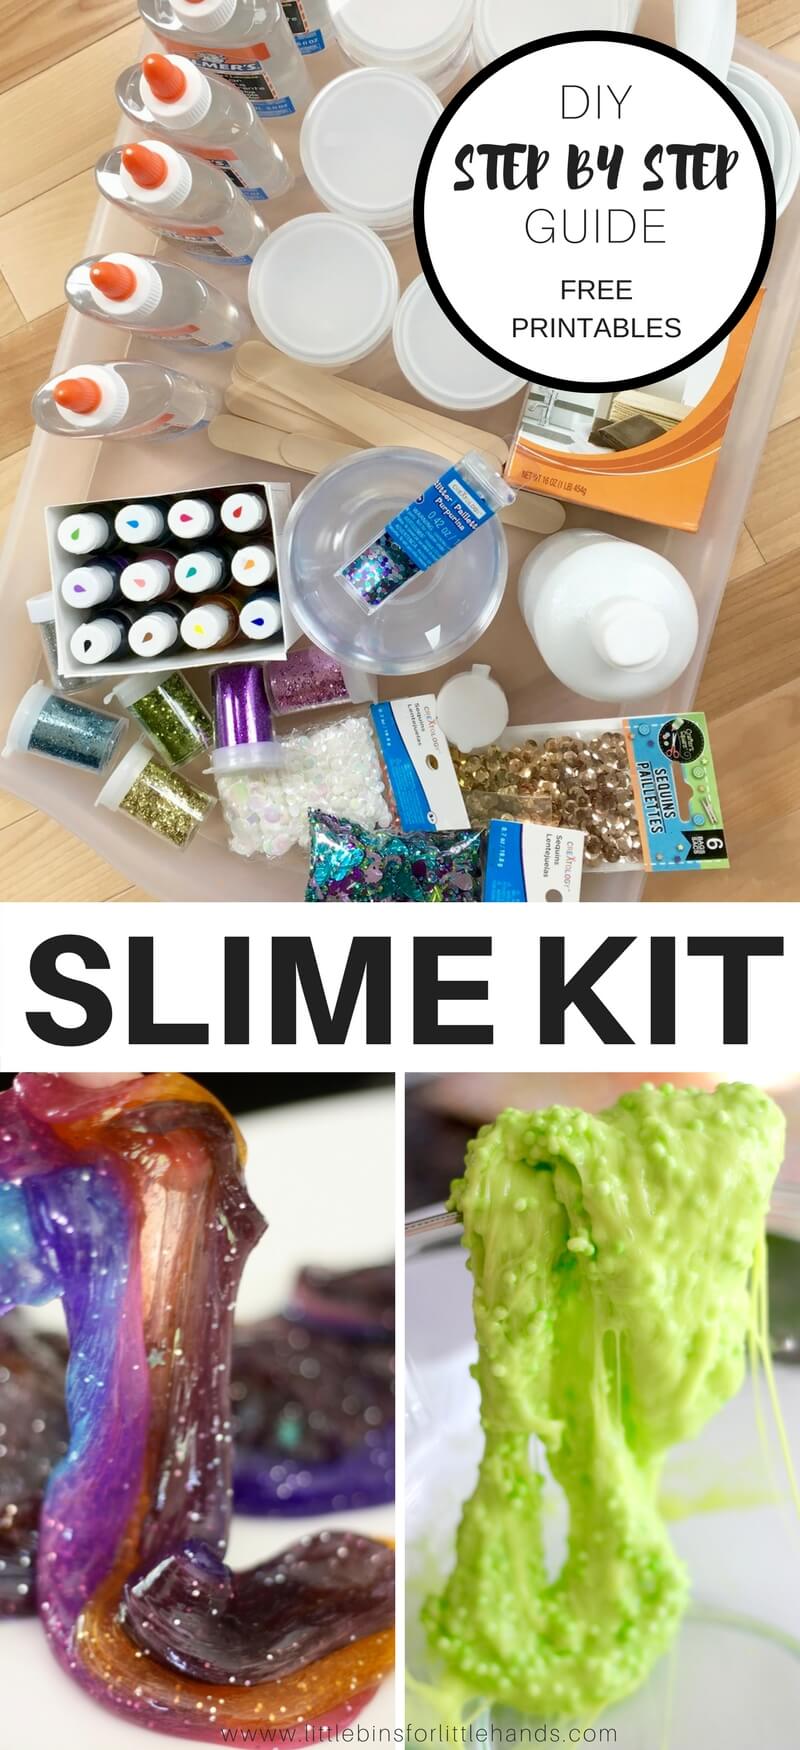 How To Make Your Own Slime Kit - Little Bins for Little Hands